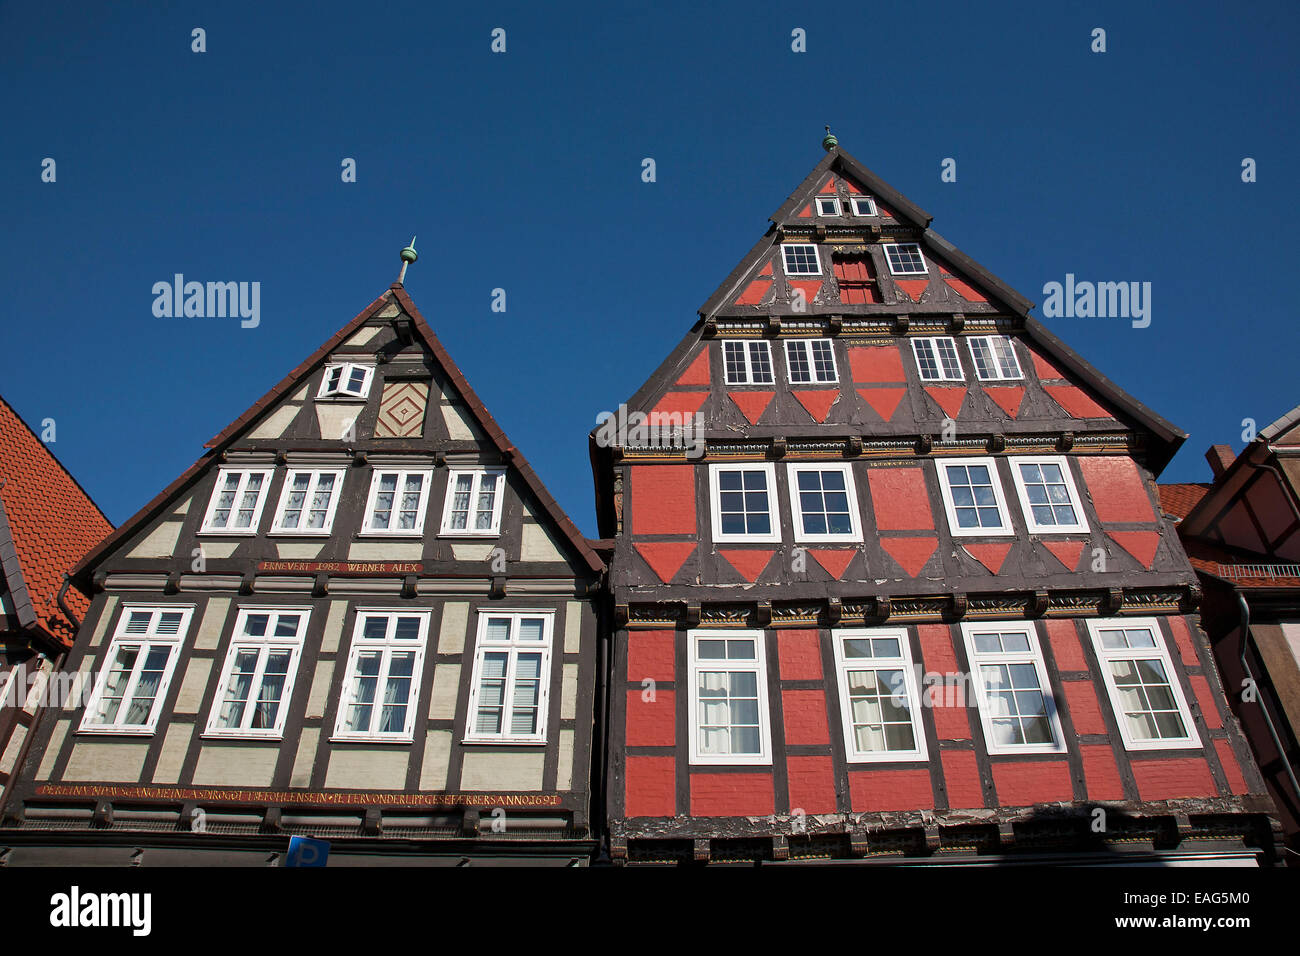 Timber-framed houses in the old town centre of Celle, Lower Saxony, Germany Stock Photo